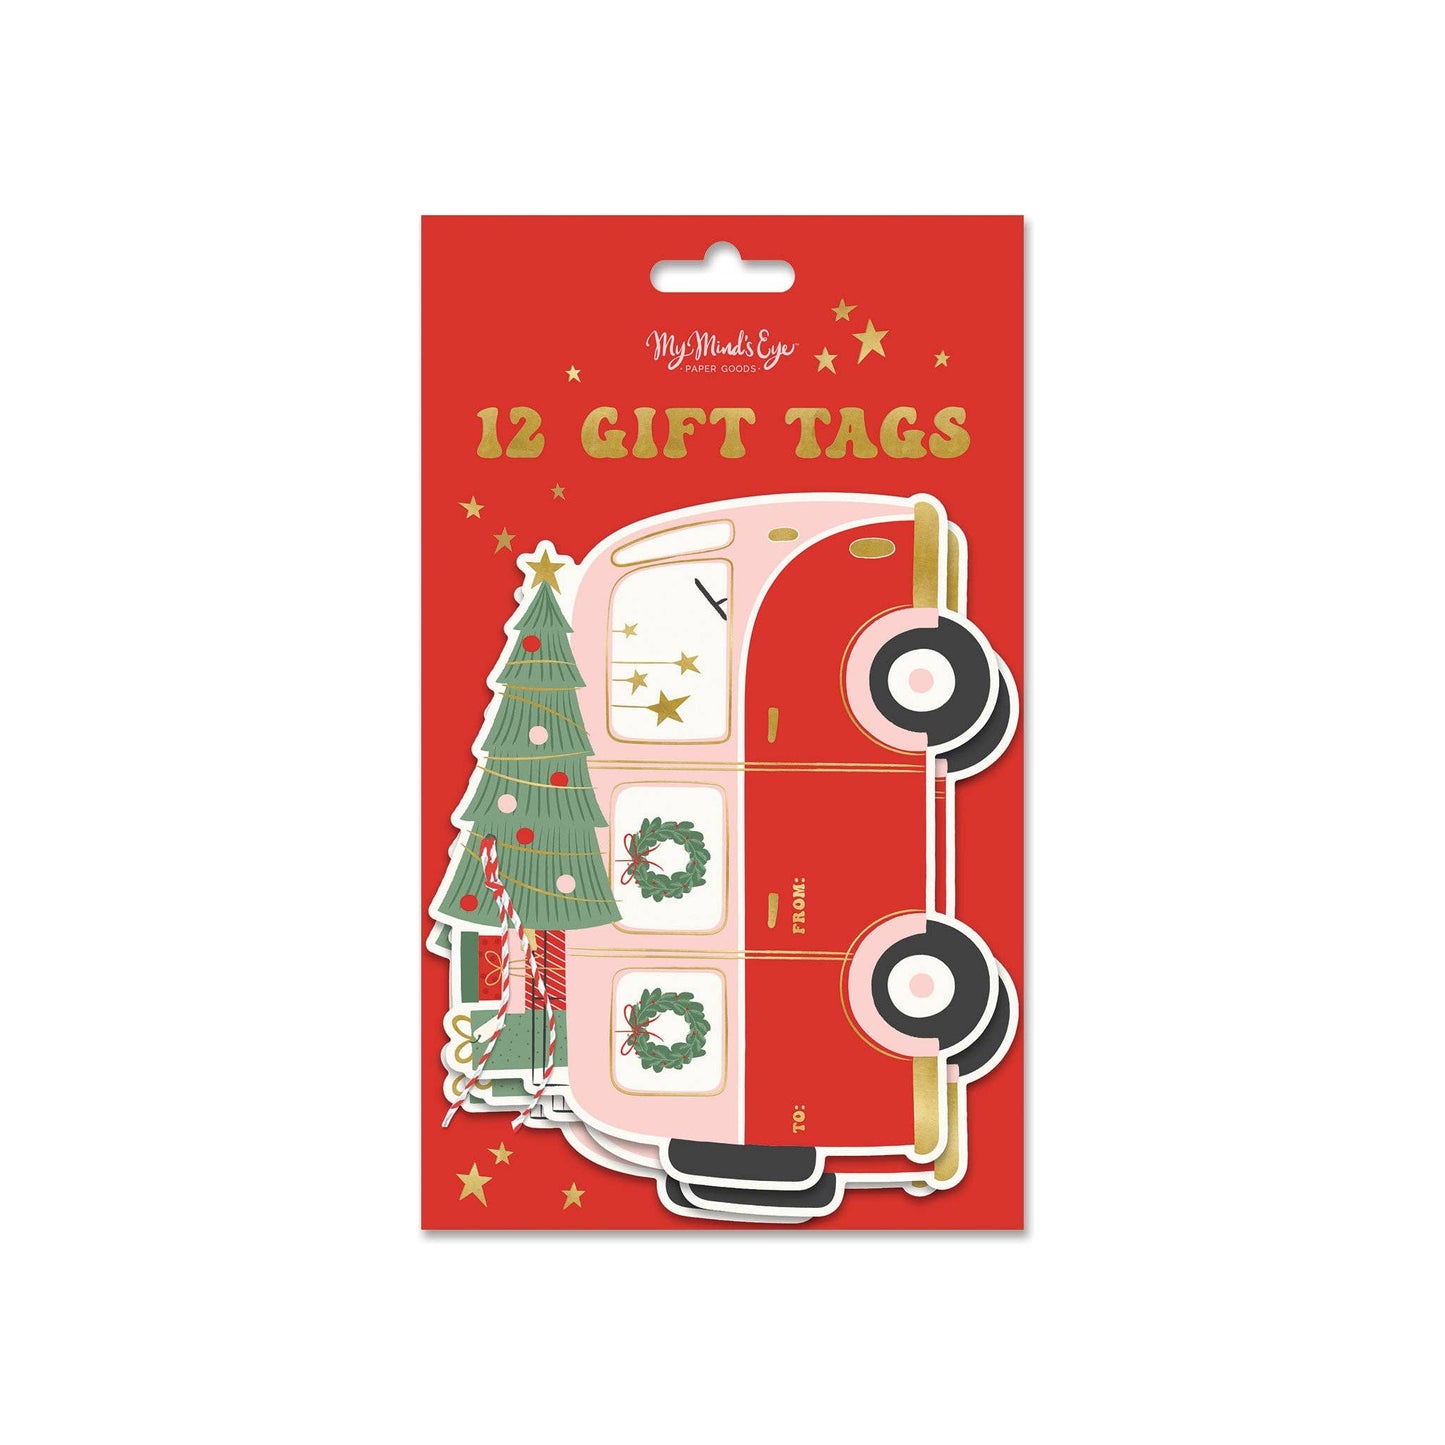 PLGT140 - Christmas Van Over-sized Tags